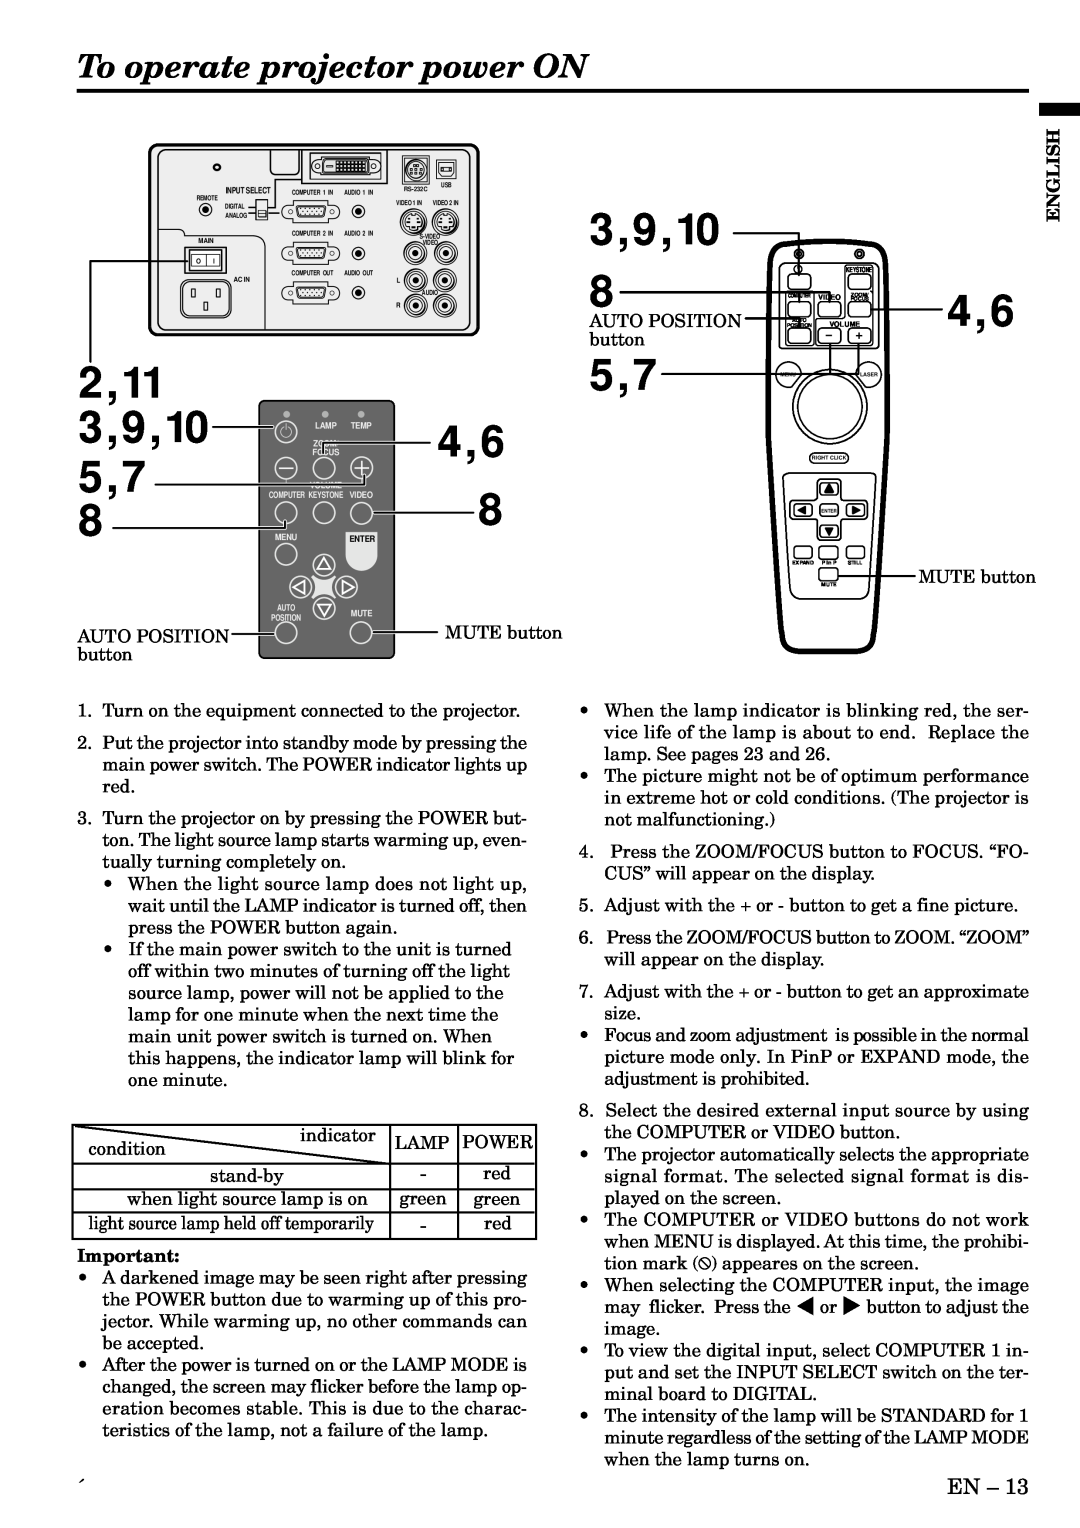 Mitsubishi Electronics X500U user manual To operate projector power ON, 9,10, English, Auto Position, button 